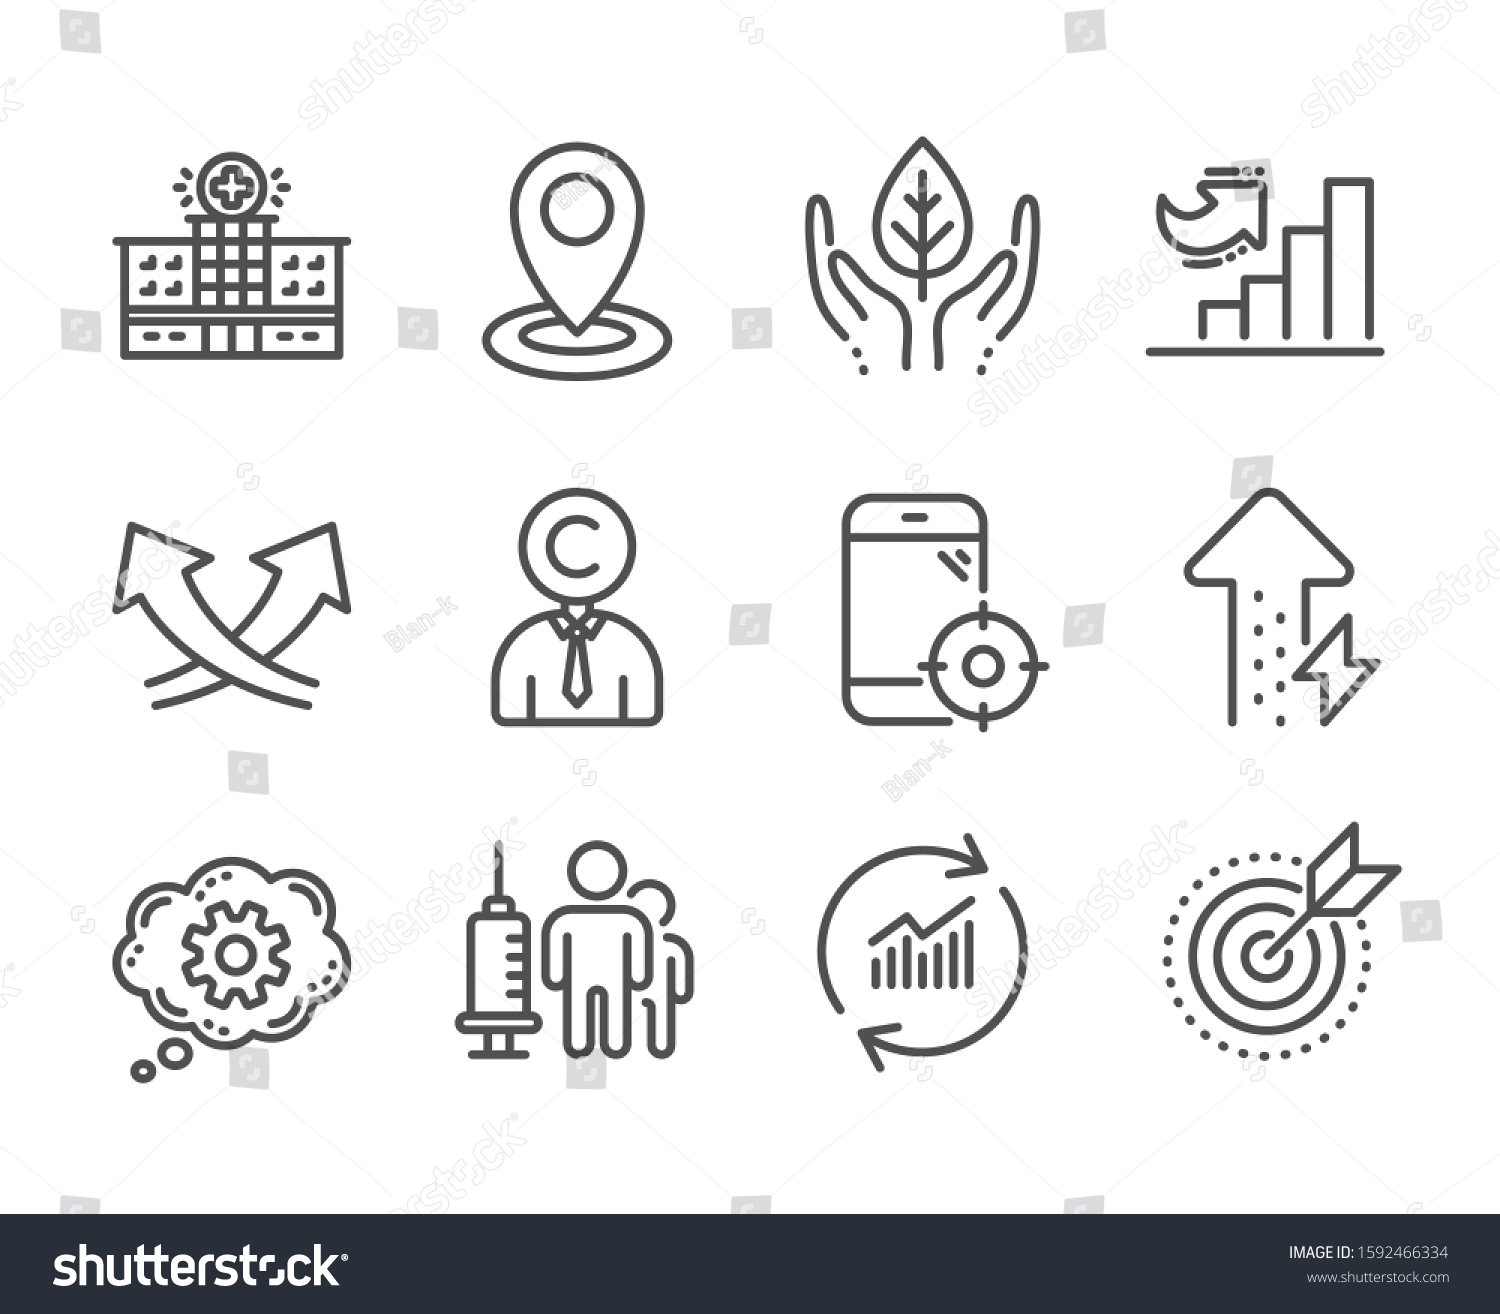 Set of Science icons, such as Copyrighter, Energy growing, Hospital building, Seo phone, Target purpose, Cogwheel, Location, Update data, Medical vaccination, Fair trade, Growth chart. Vector